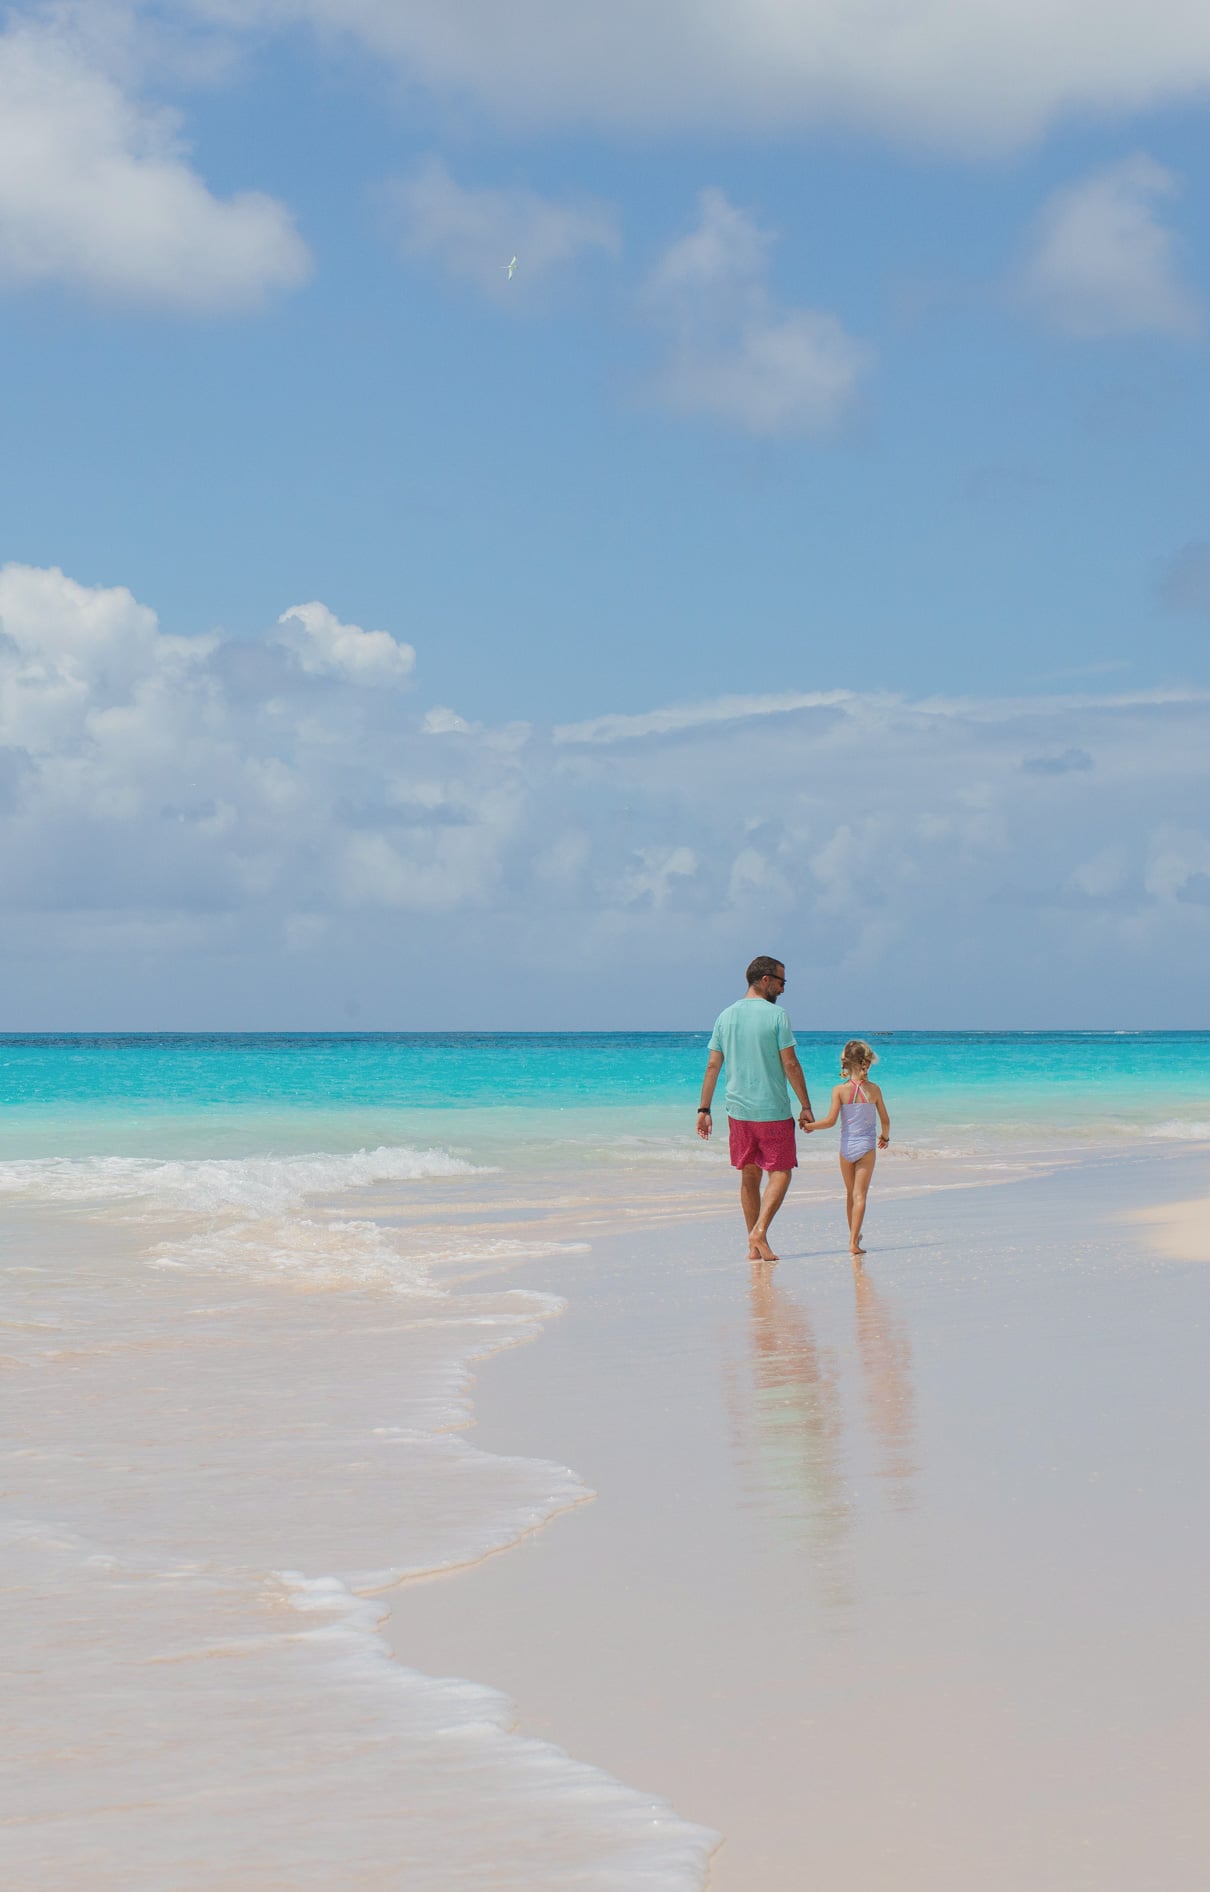 A child holding hands and walking on a beach with her father.